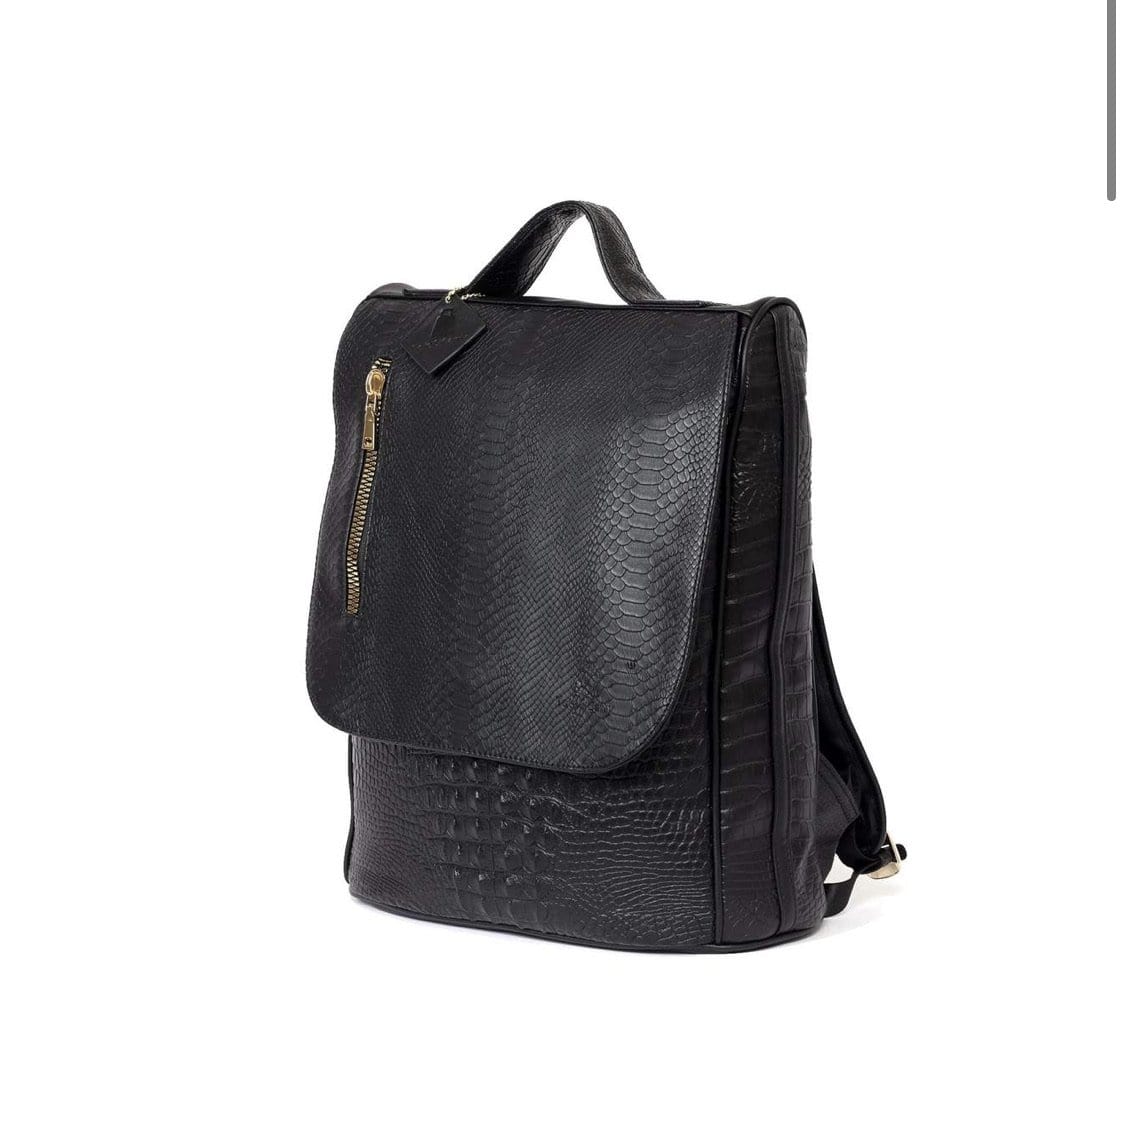 Tote & Carry Bags Black Apollo II Backpack